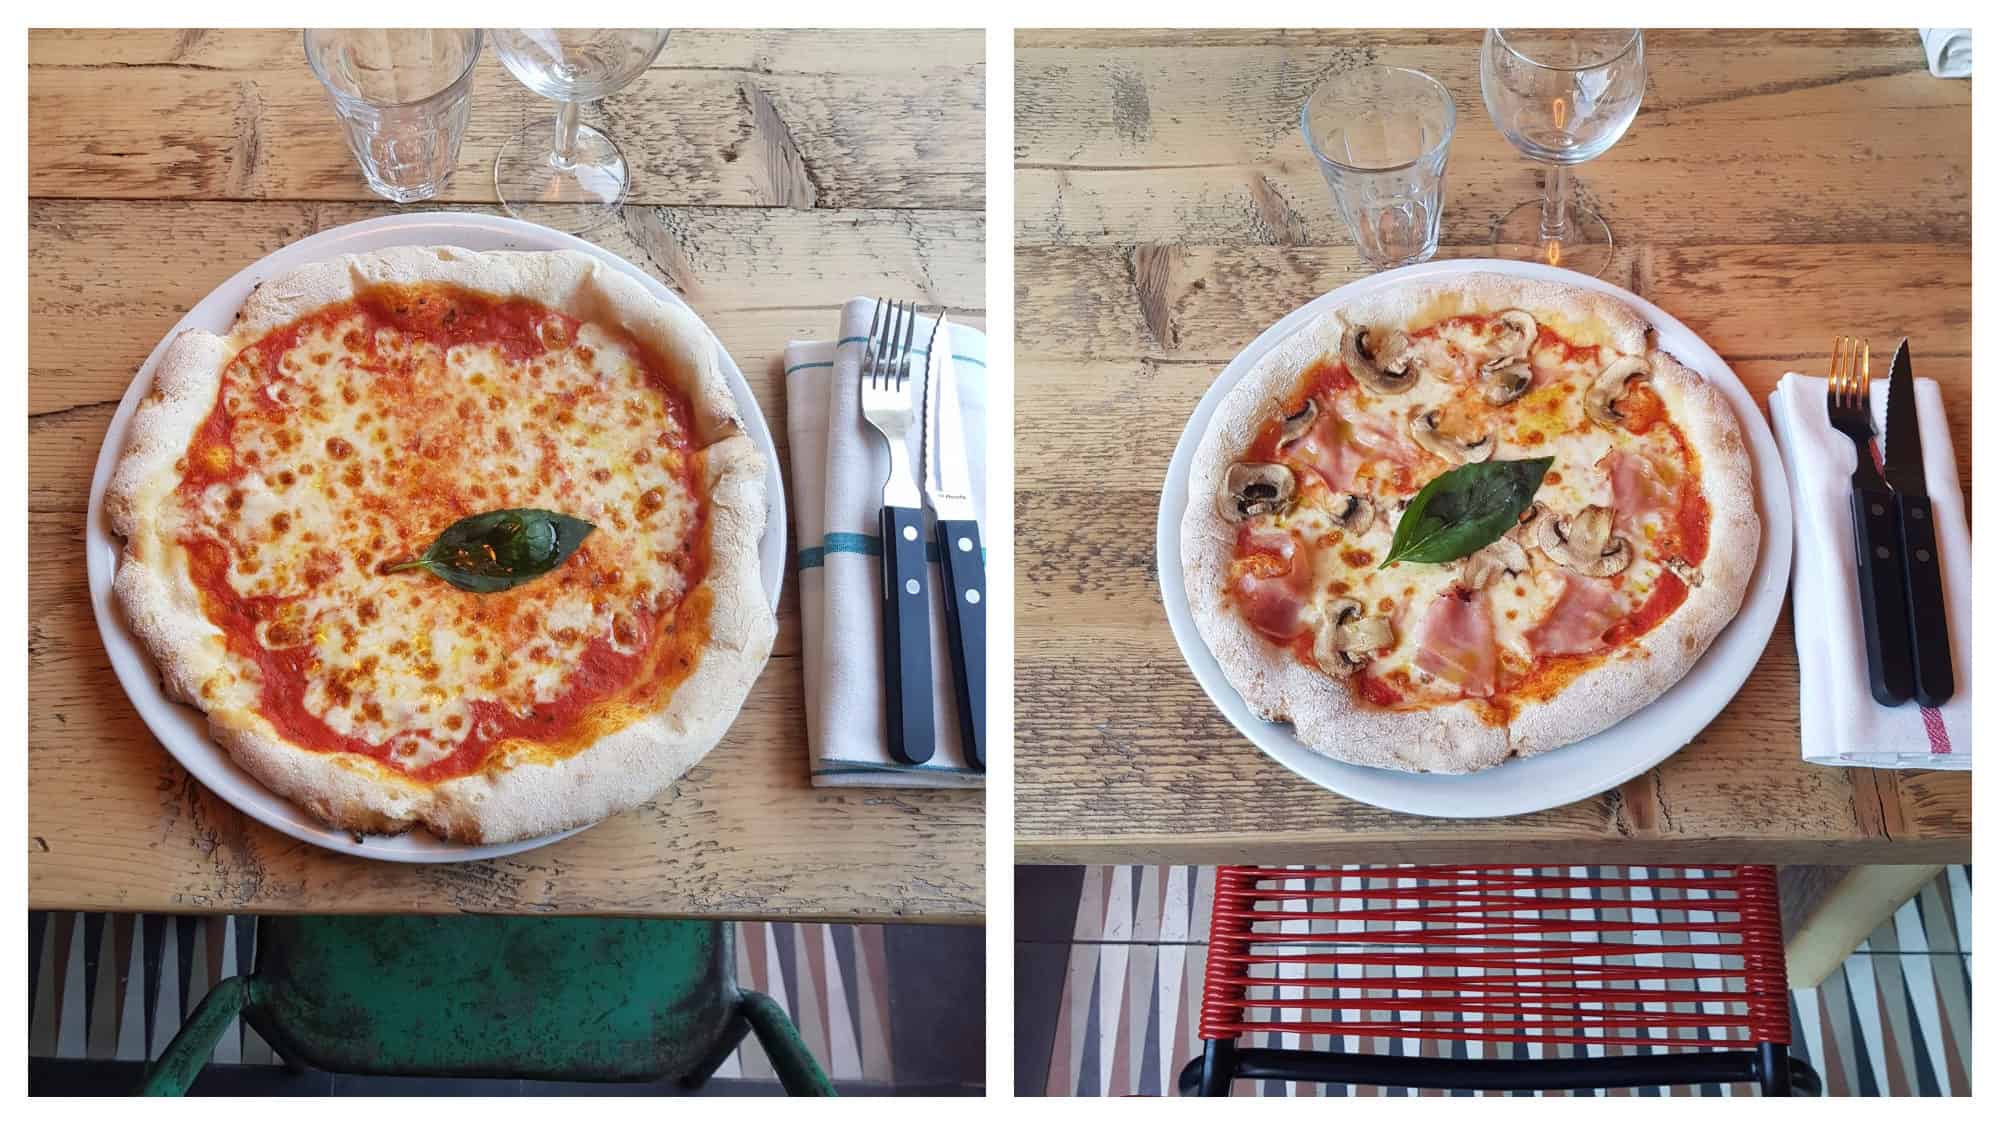 Two gluten-free pizzas, one a margherita (left) and one a ham and mushroom (right), set on a wooden table at Little Nonna.